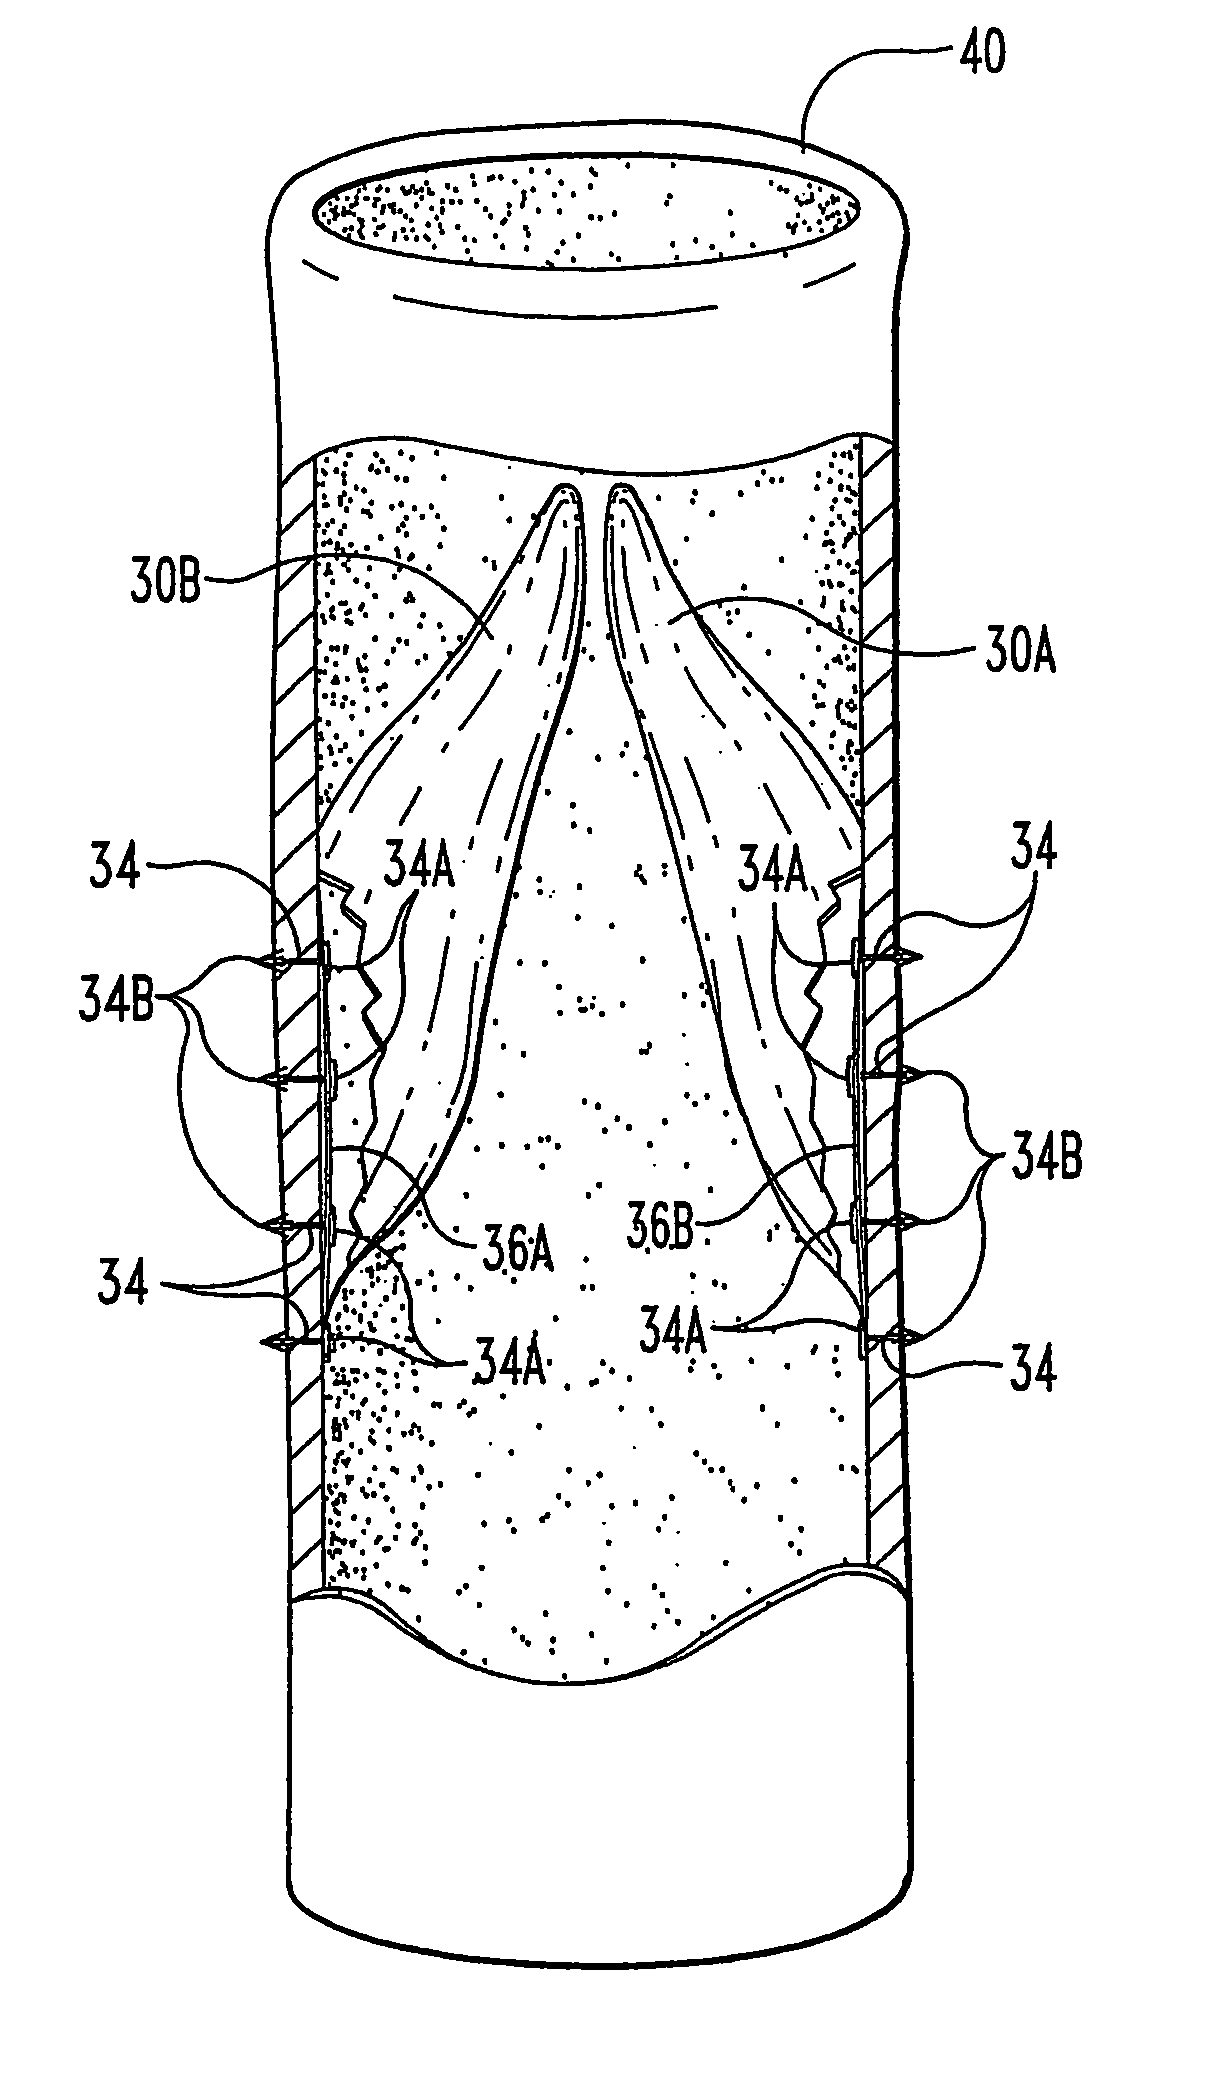 Methods and devices for the endoluminal deployment and securement of prostheses